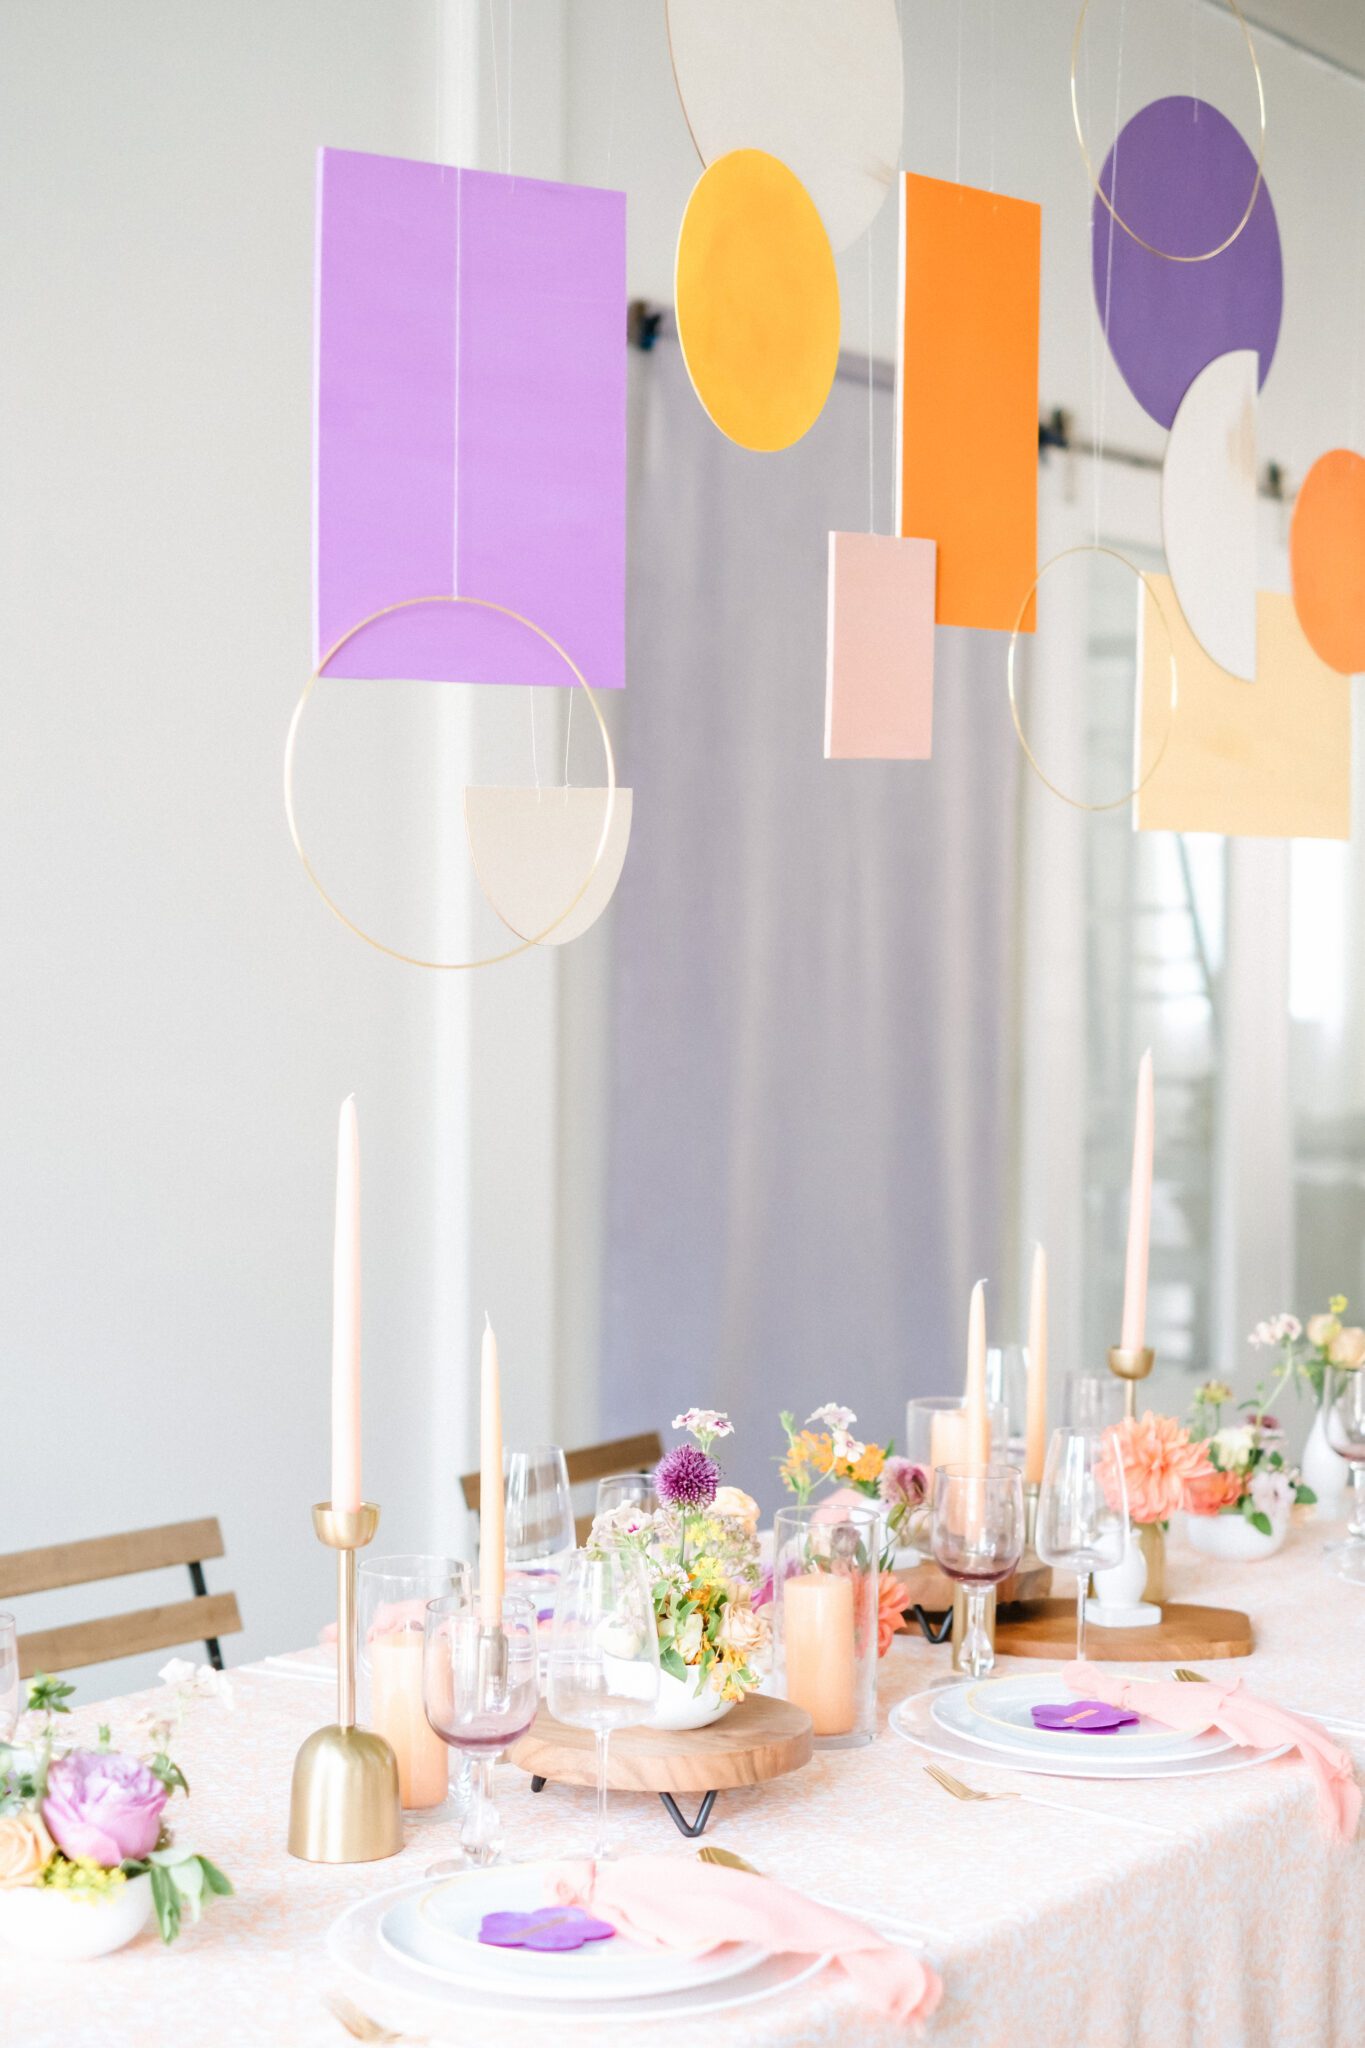 Bright & Colourful Brunch Wedding Inspiration at The Brownstone Calgary, Bronte Bride. Retro inspired vibrant colour palette of purple, orange, yellow, peach, tangerine and coral. Geometric hanging installation over the tables. 